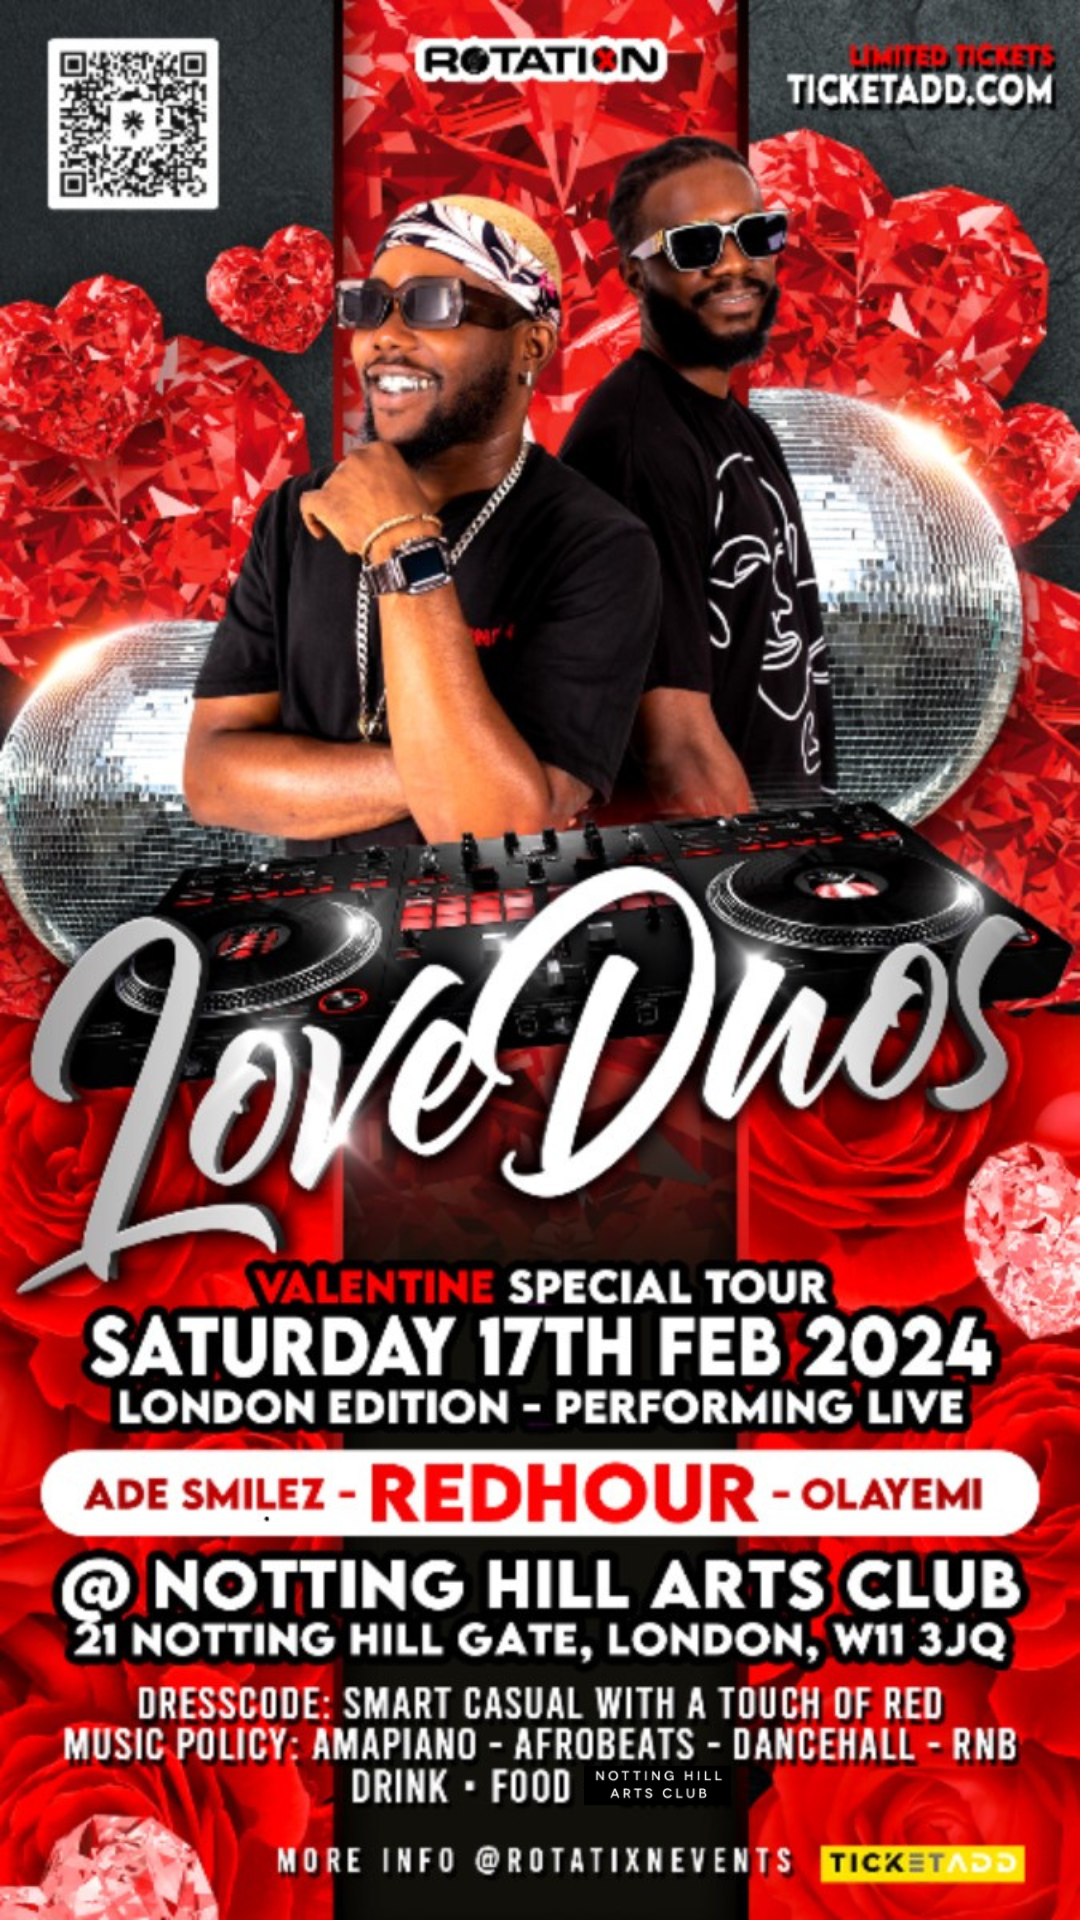 LOVE DUOS feat. REDHOUR - Ade Smilez & Olayemi